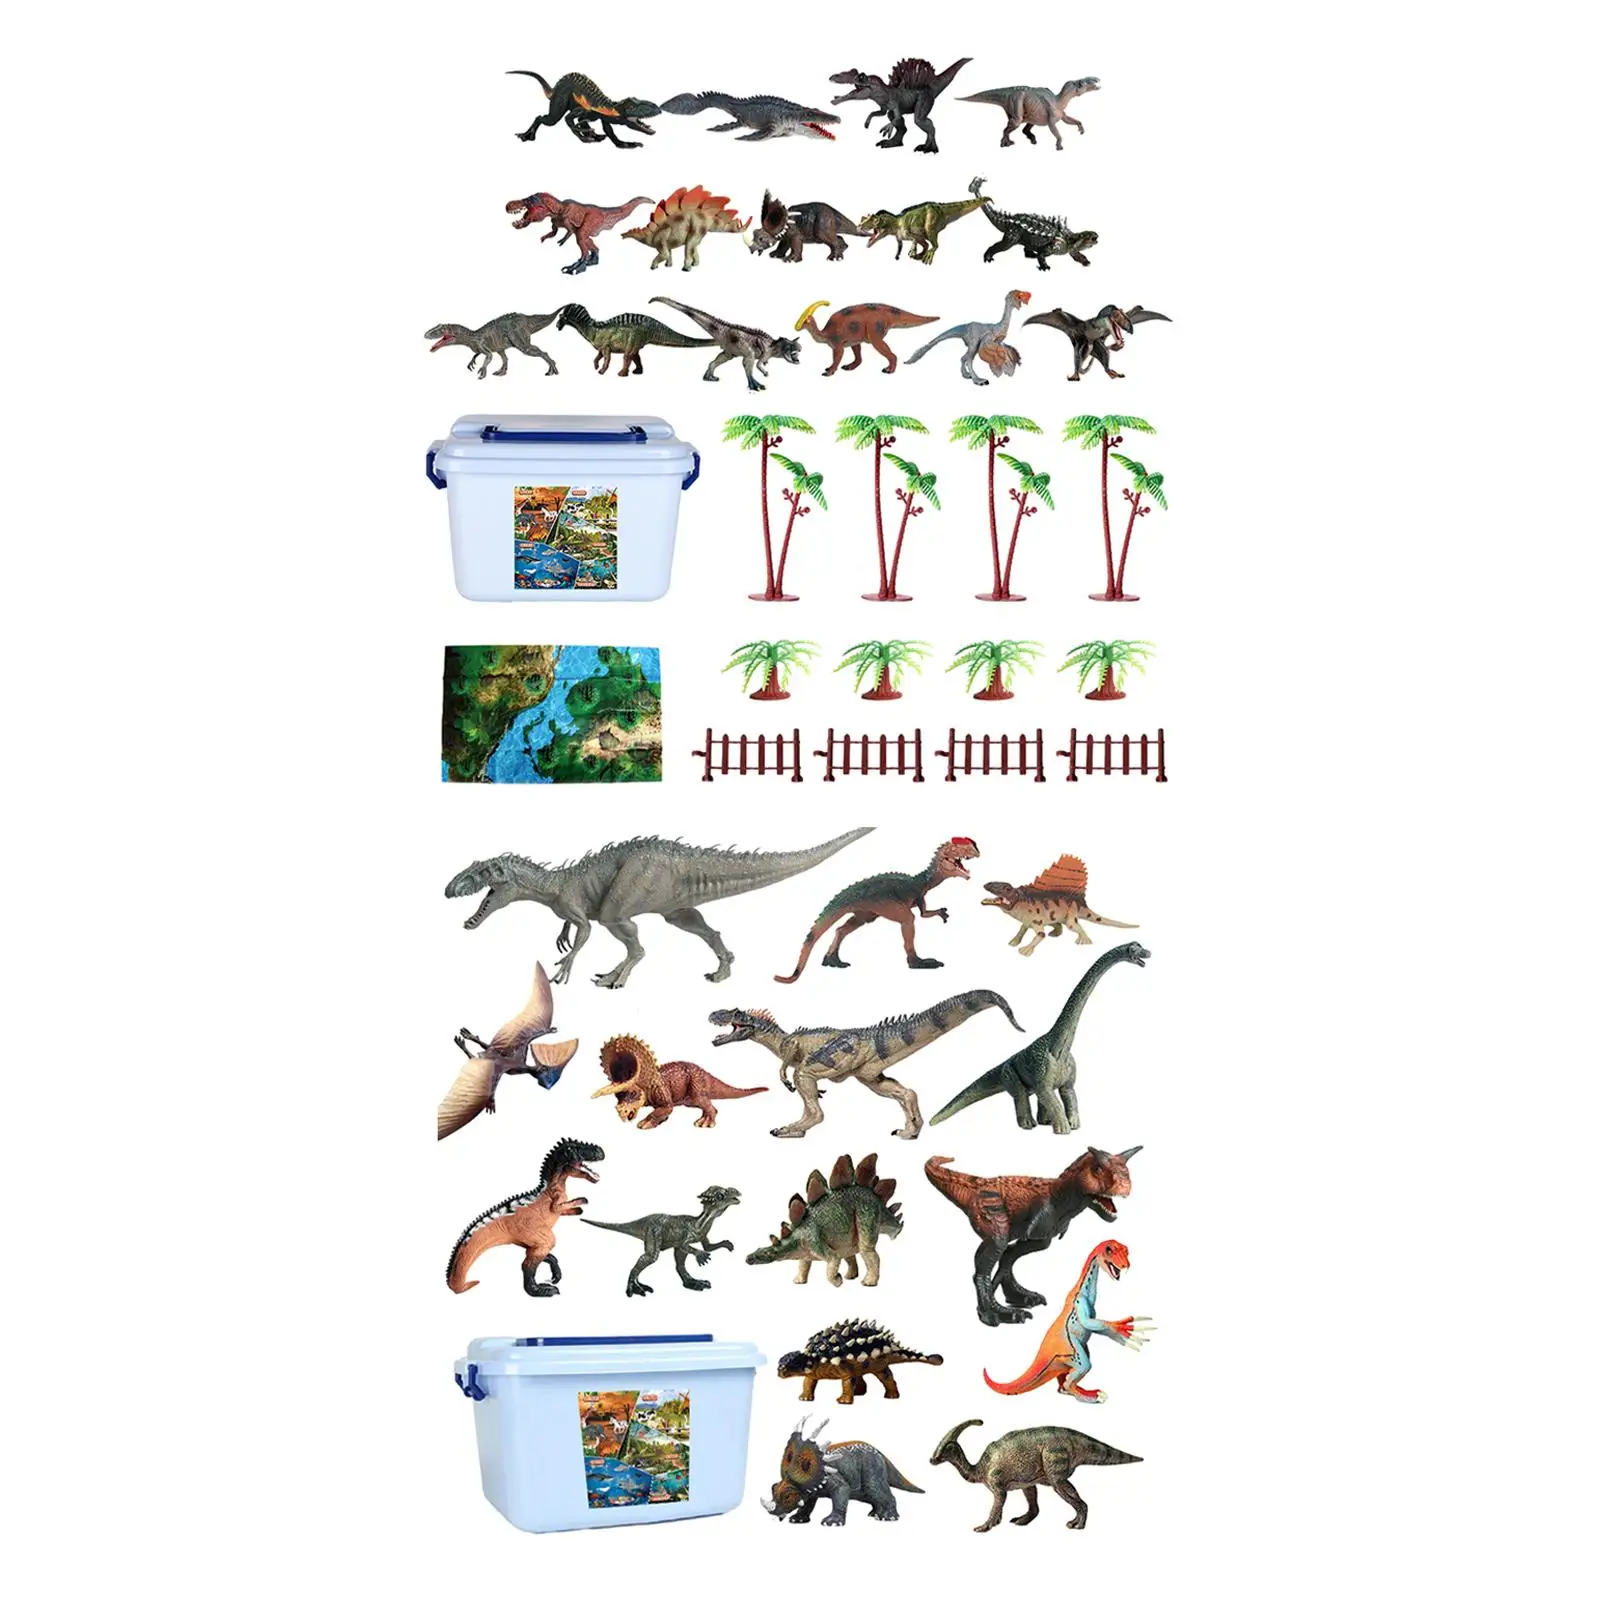 15x Toddlers Dinosaur Toys Wildlife Animal Figurine for New Year Cake Topper